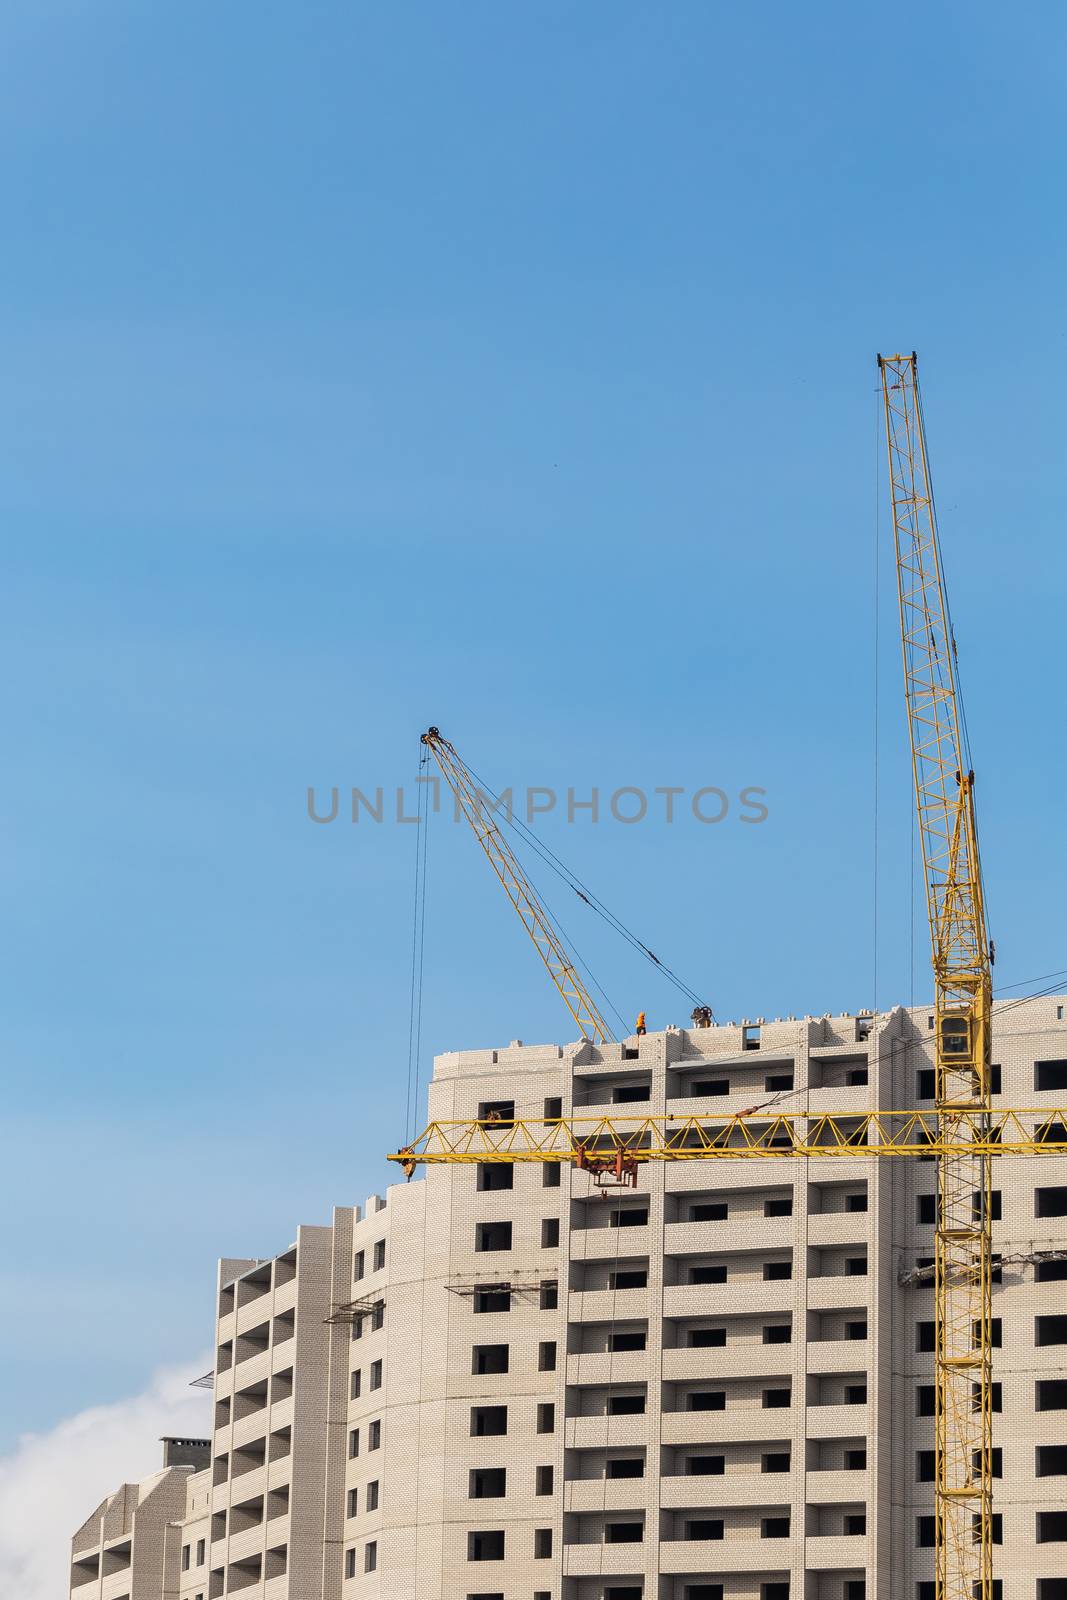 Construction site. Unfinished apartment buildings. Construction worker laying bricks on top. Special industrial cranes. Blue sky background